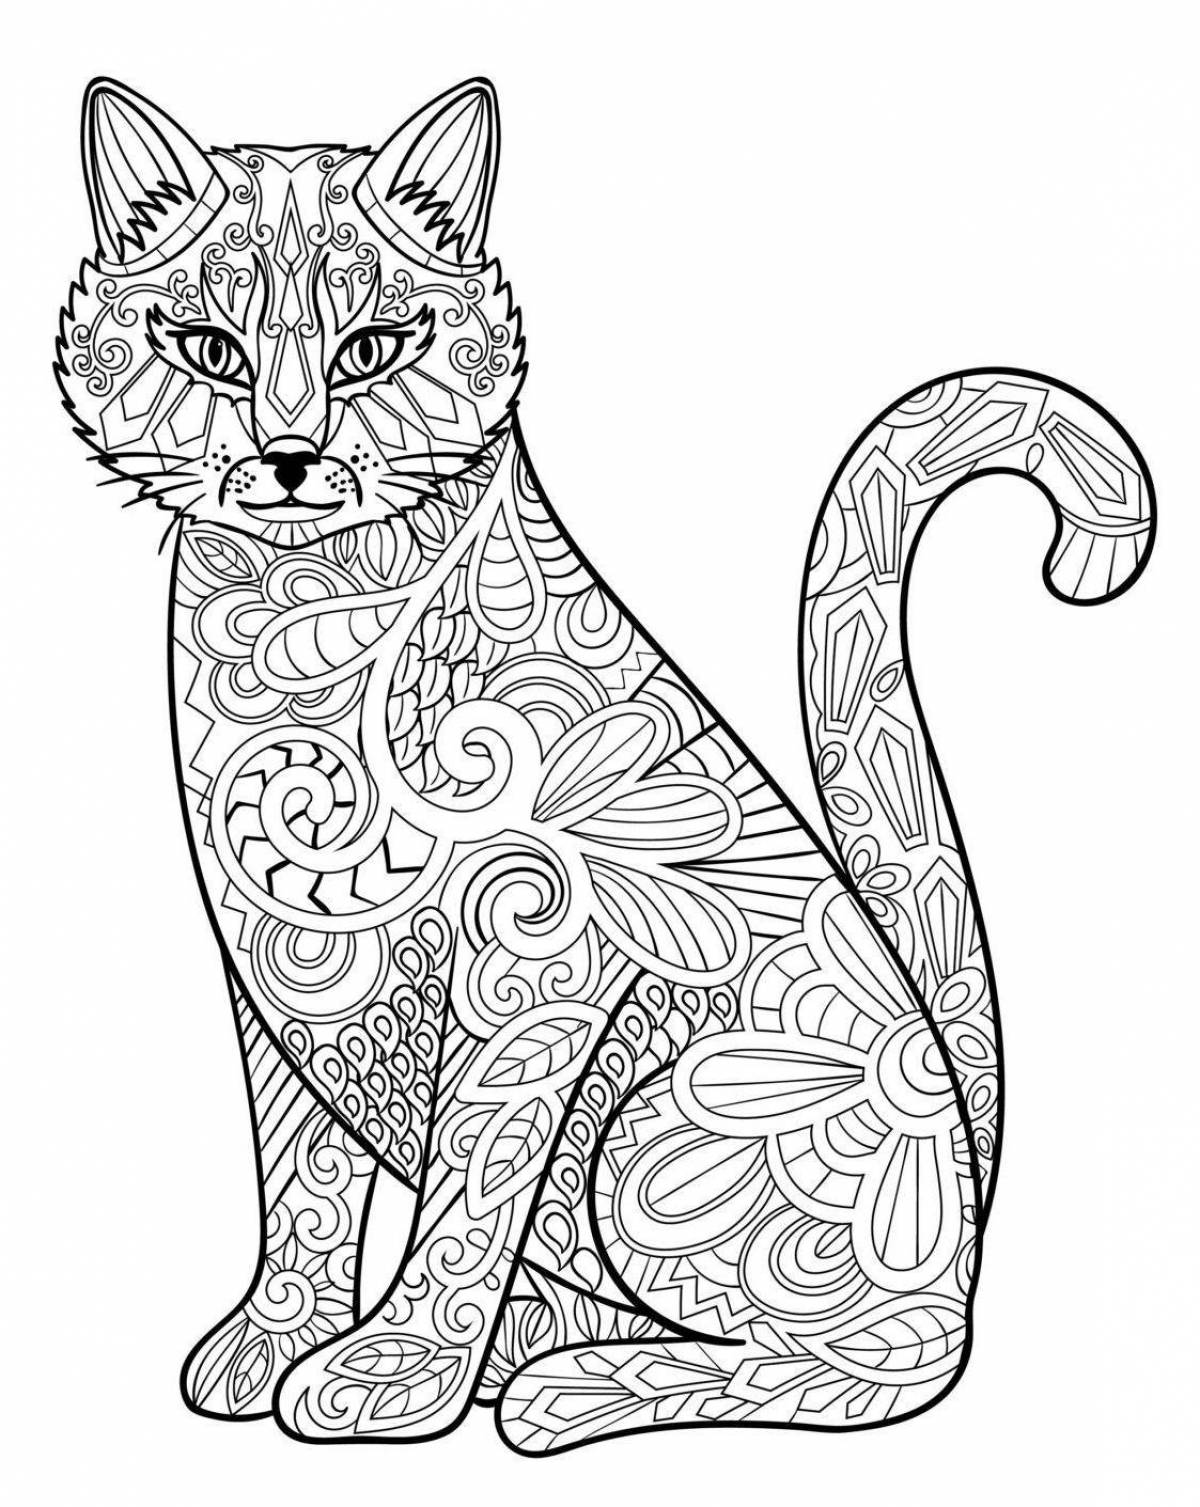 Mysterious magical cats coloring book